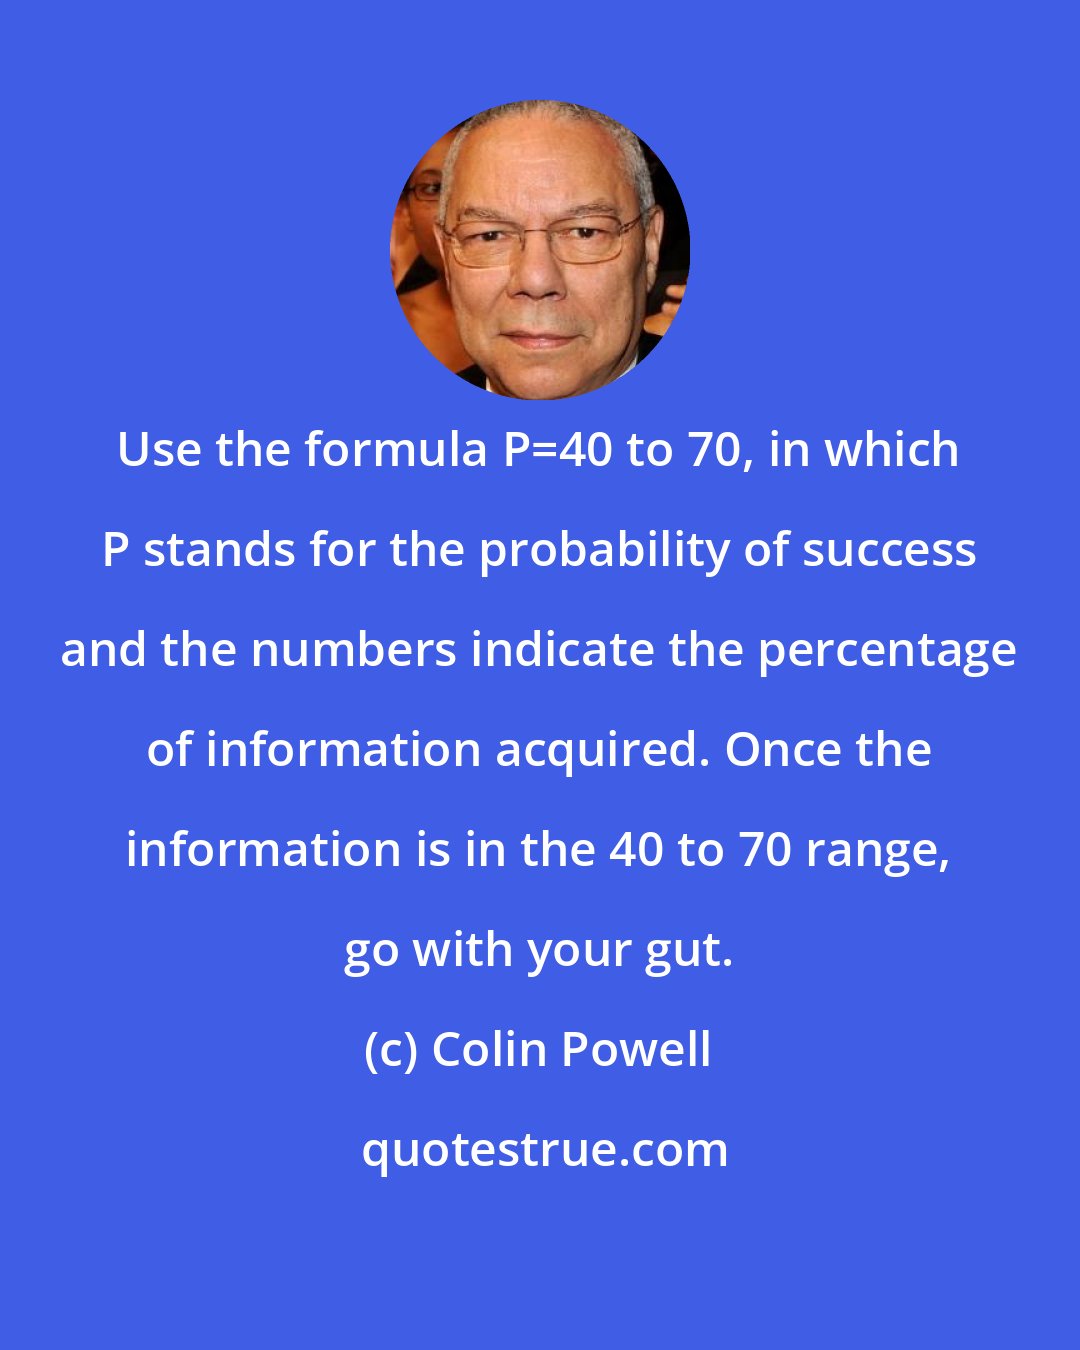 Colin Powell: Use the formula P=40 to 70, in which P stands for the probability of success and the numbers indicate the percentage of information acquired. Once the information is in the 40 to 70 range, go with your gut.